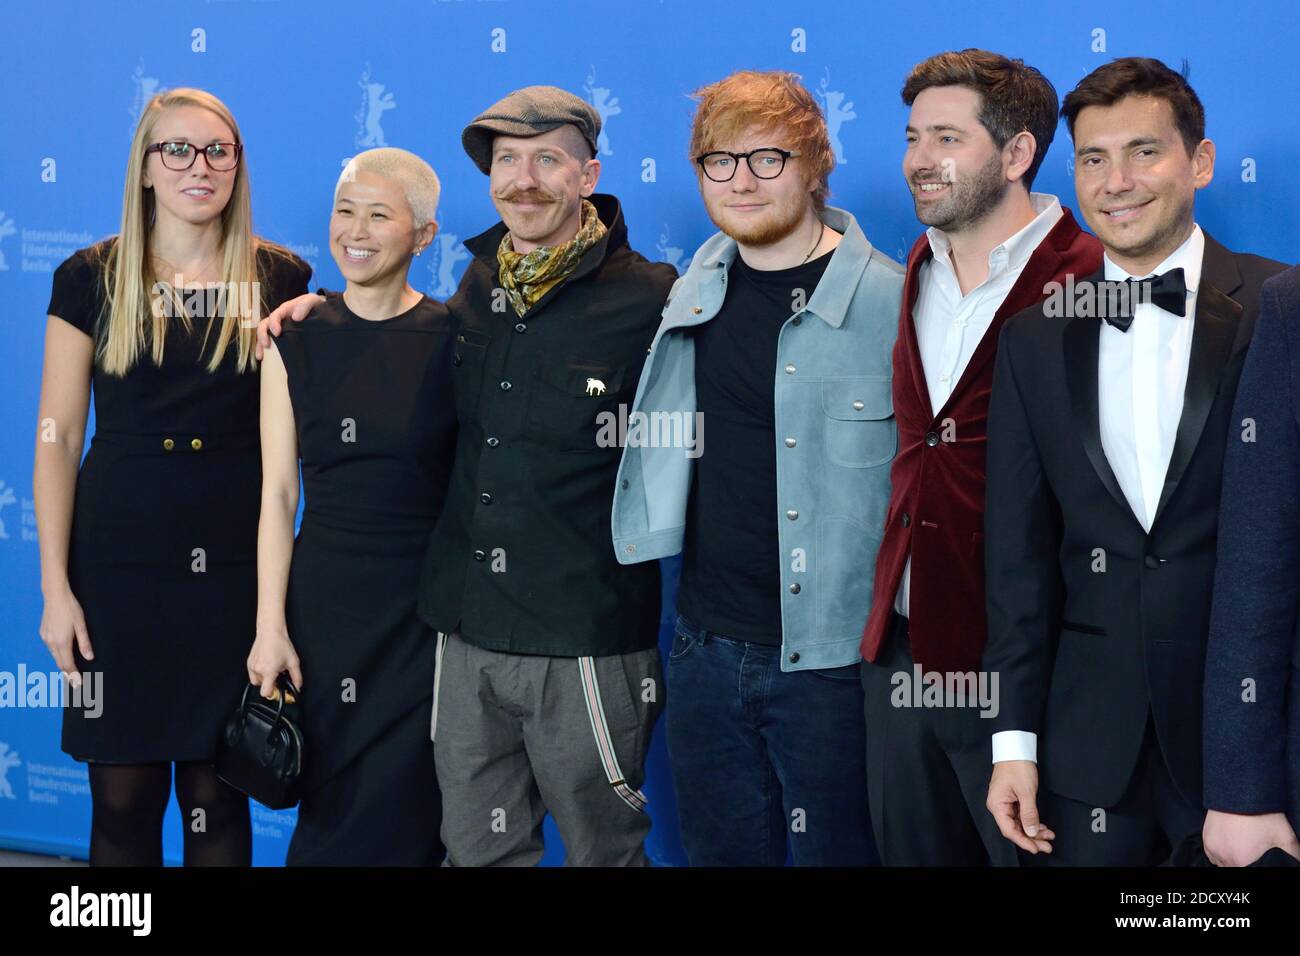 Maleri Sevier, Kimmie Kim, Foy Vance, Ed Sheeran, Murray Cummings and Alejandro Reyes-Knight attending the Songwriter Photocall during the 68th Berlin International Film Festival (Berlinale) in Berlin, Germany on February 23, 2018. Photo by Aurore Marechal/ABACAPRESS.COM Stock Photo